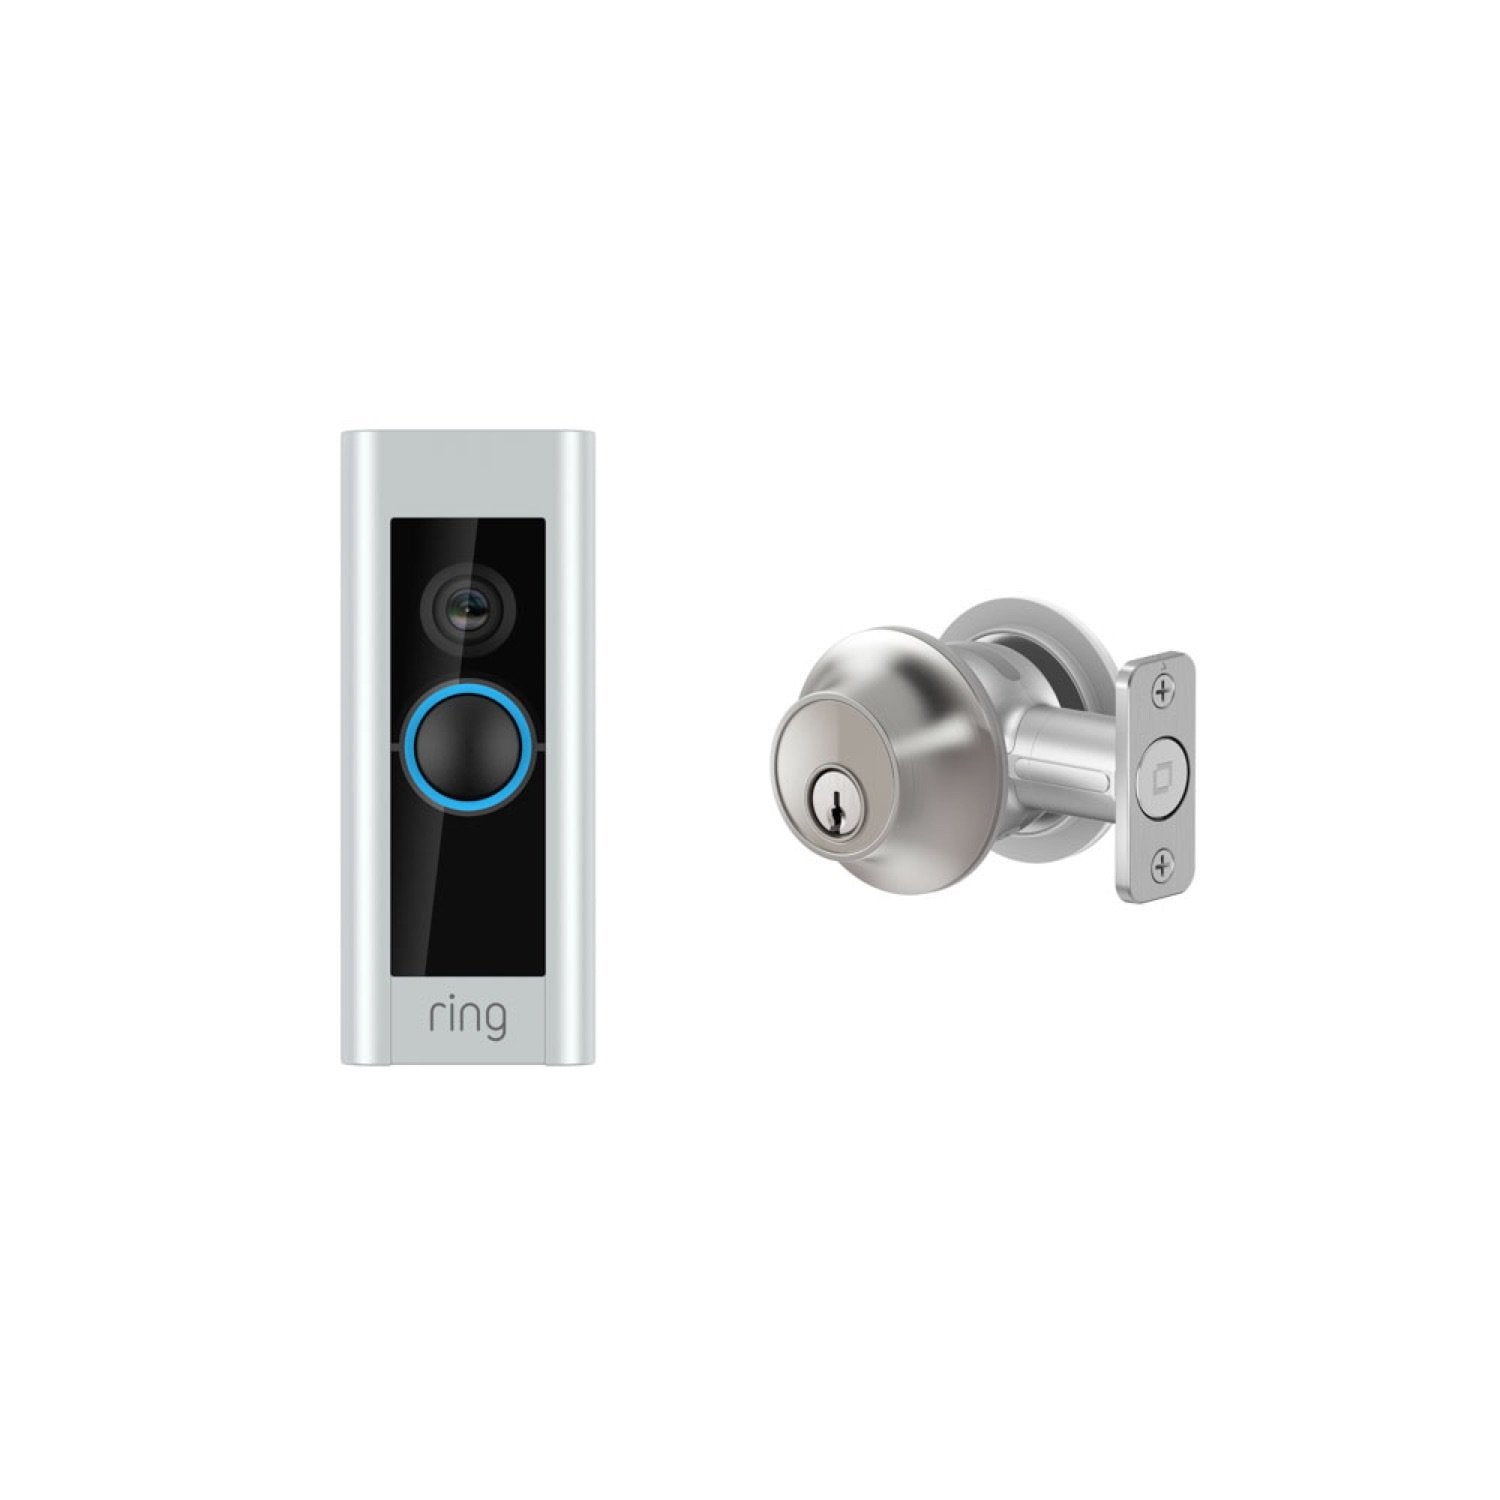 Wired Doorbell Plus (Video Doorbell Pro) and Level Lock - Touch Edition - Satin Chrome